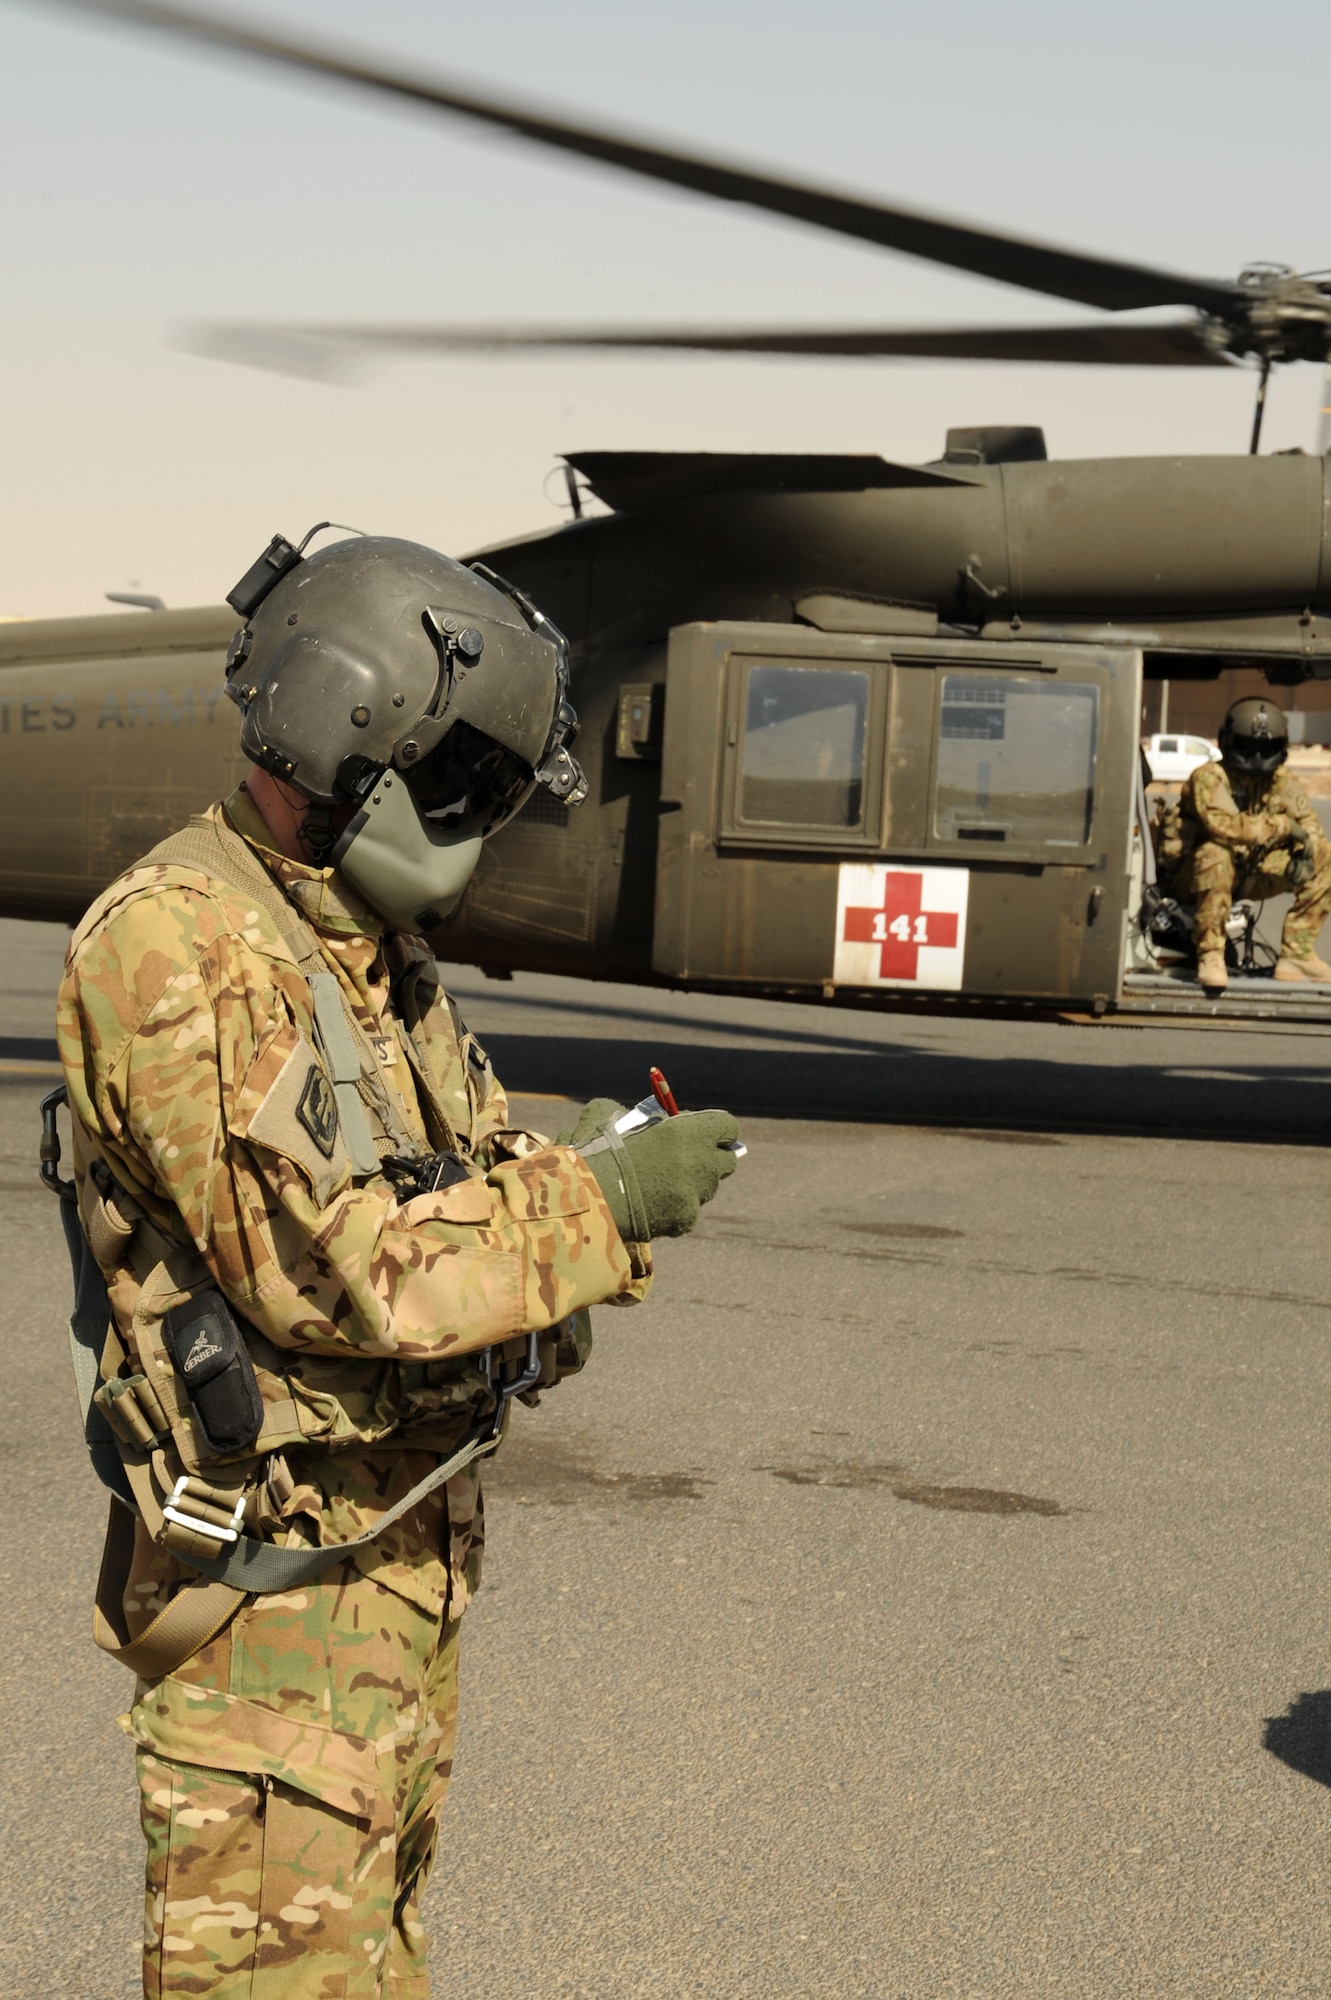 U.S. Army Sgt. John Tsohandaridis, flight medic, makes a note while watching a patient load during medical evacuation training Oct. 14, 2016 at undisclosed location in Southwest Asia. Army flight medics led the training that supported Air Force and coalition partner medical teams to enhance mission capabilities. (U.S. Air Force photo/Senior Airman Zachary Kee)